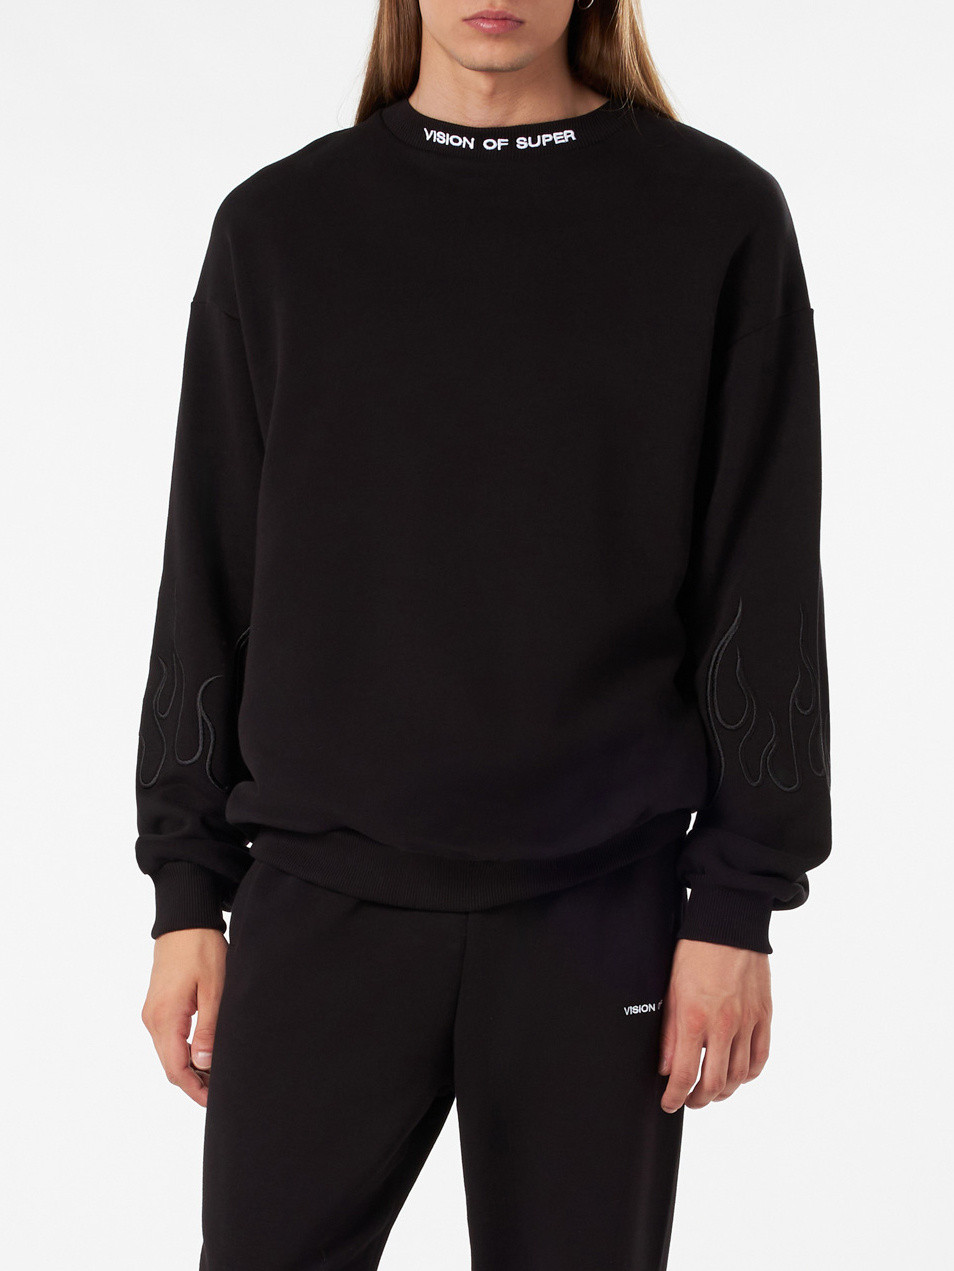 Vision of Super - Sweatshirt with embroidered flames, Black, large image number 2